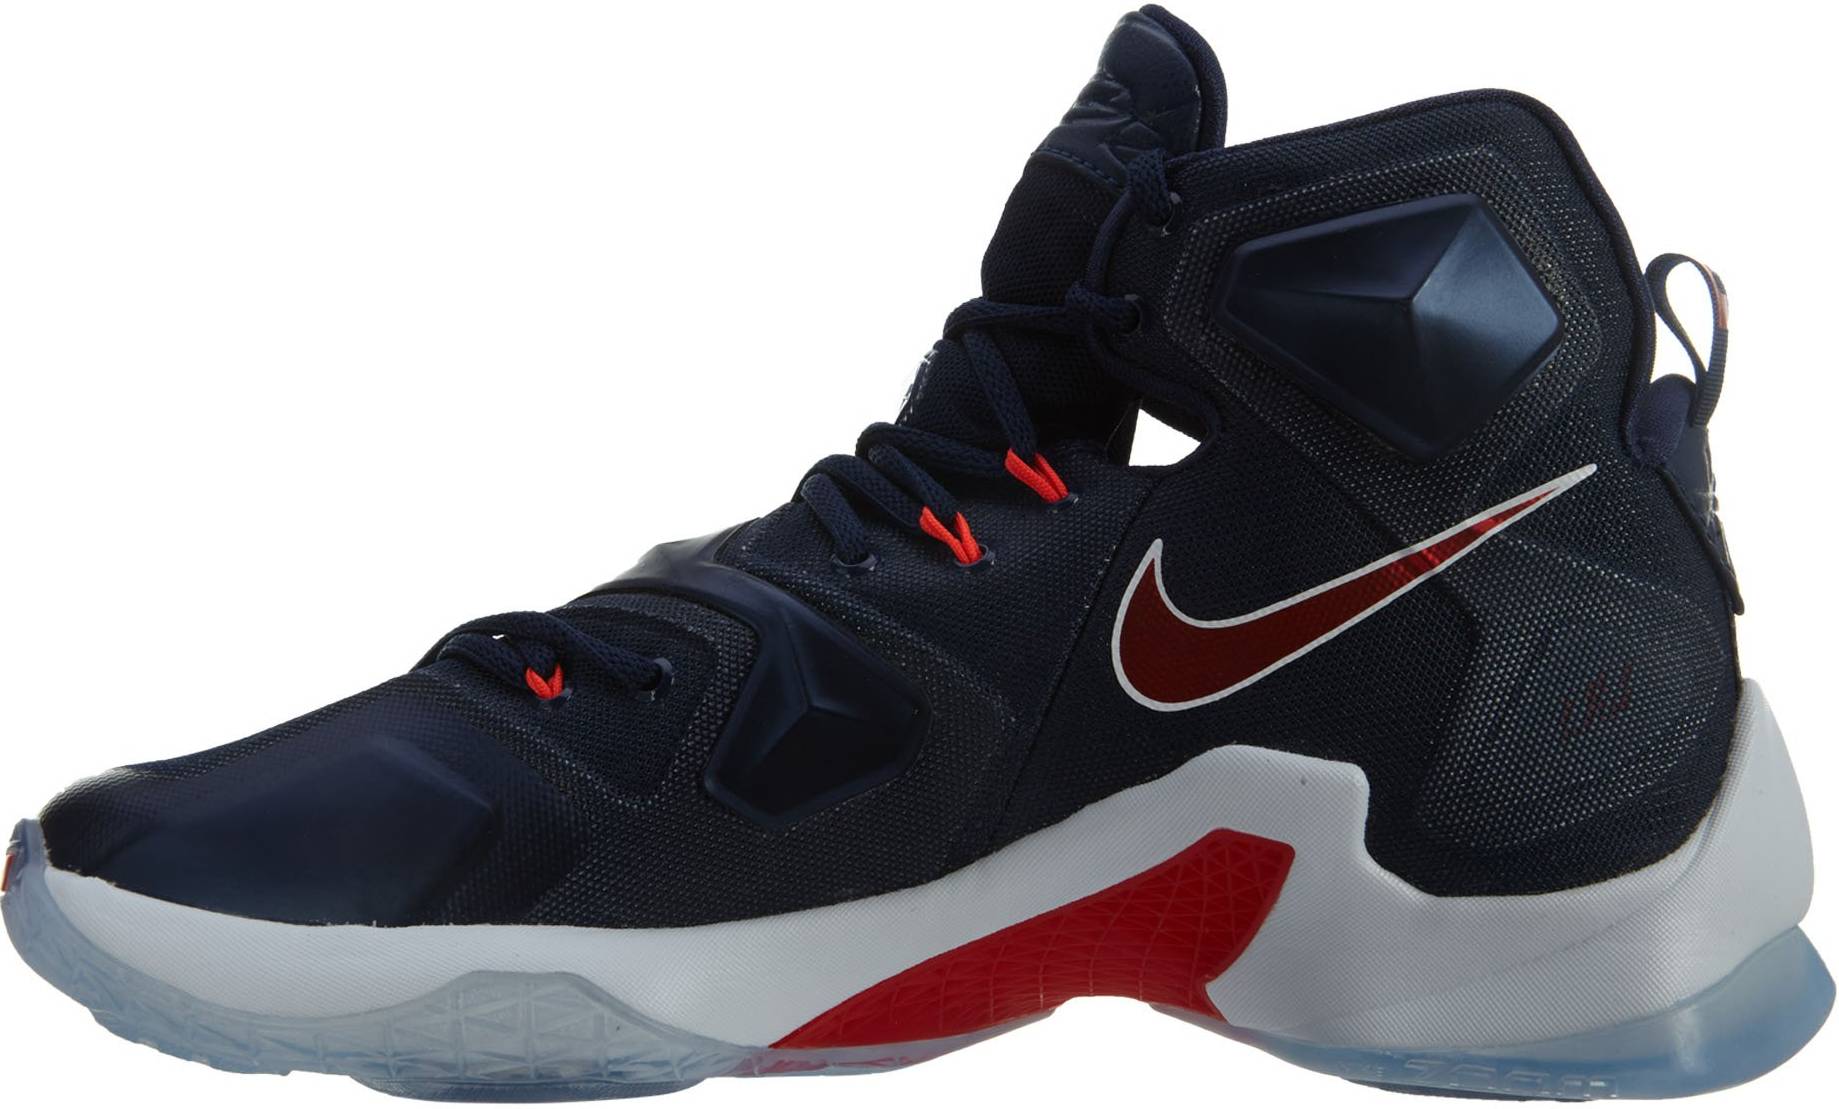 Only $160 + Review of Nike Lebron 13 